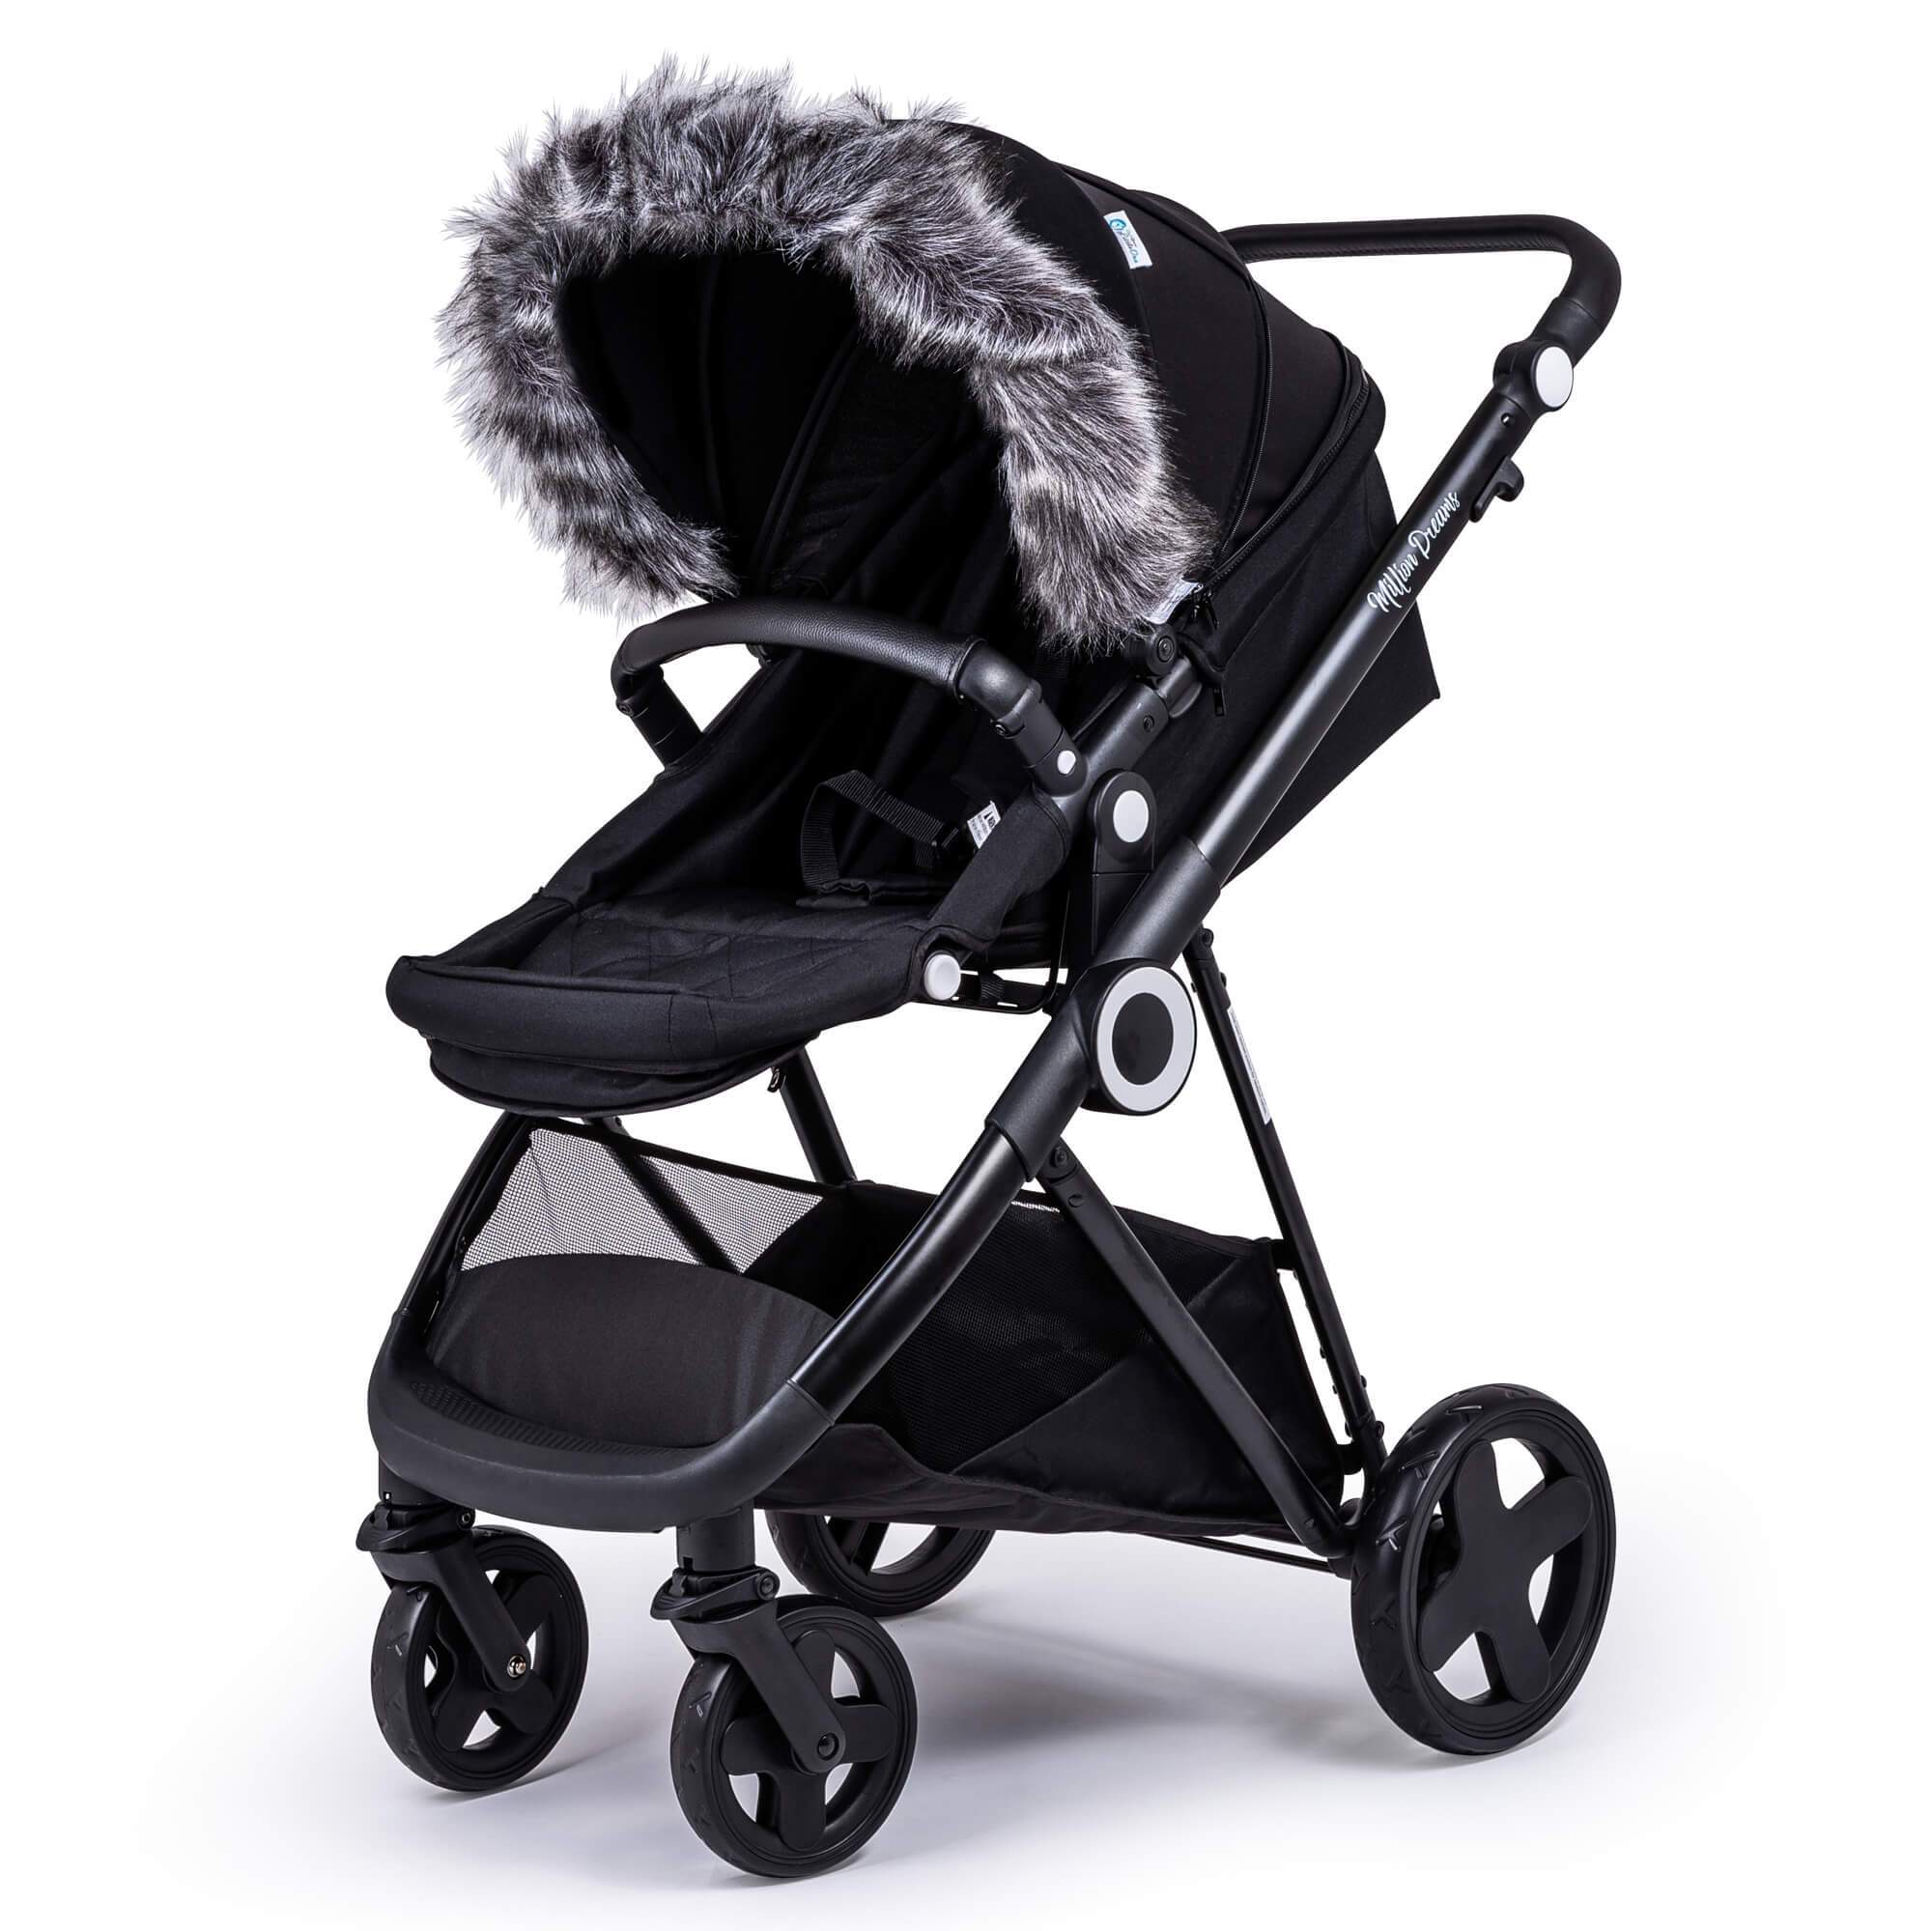 Pram Fur Hood Trim Attachment for Pushchair Compatible with Egg - Dark Grey / Fits All Models | For Your Little One